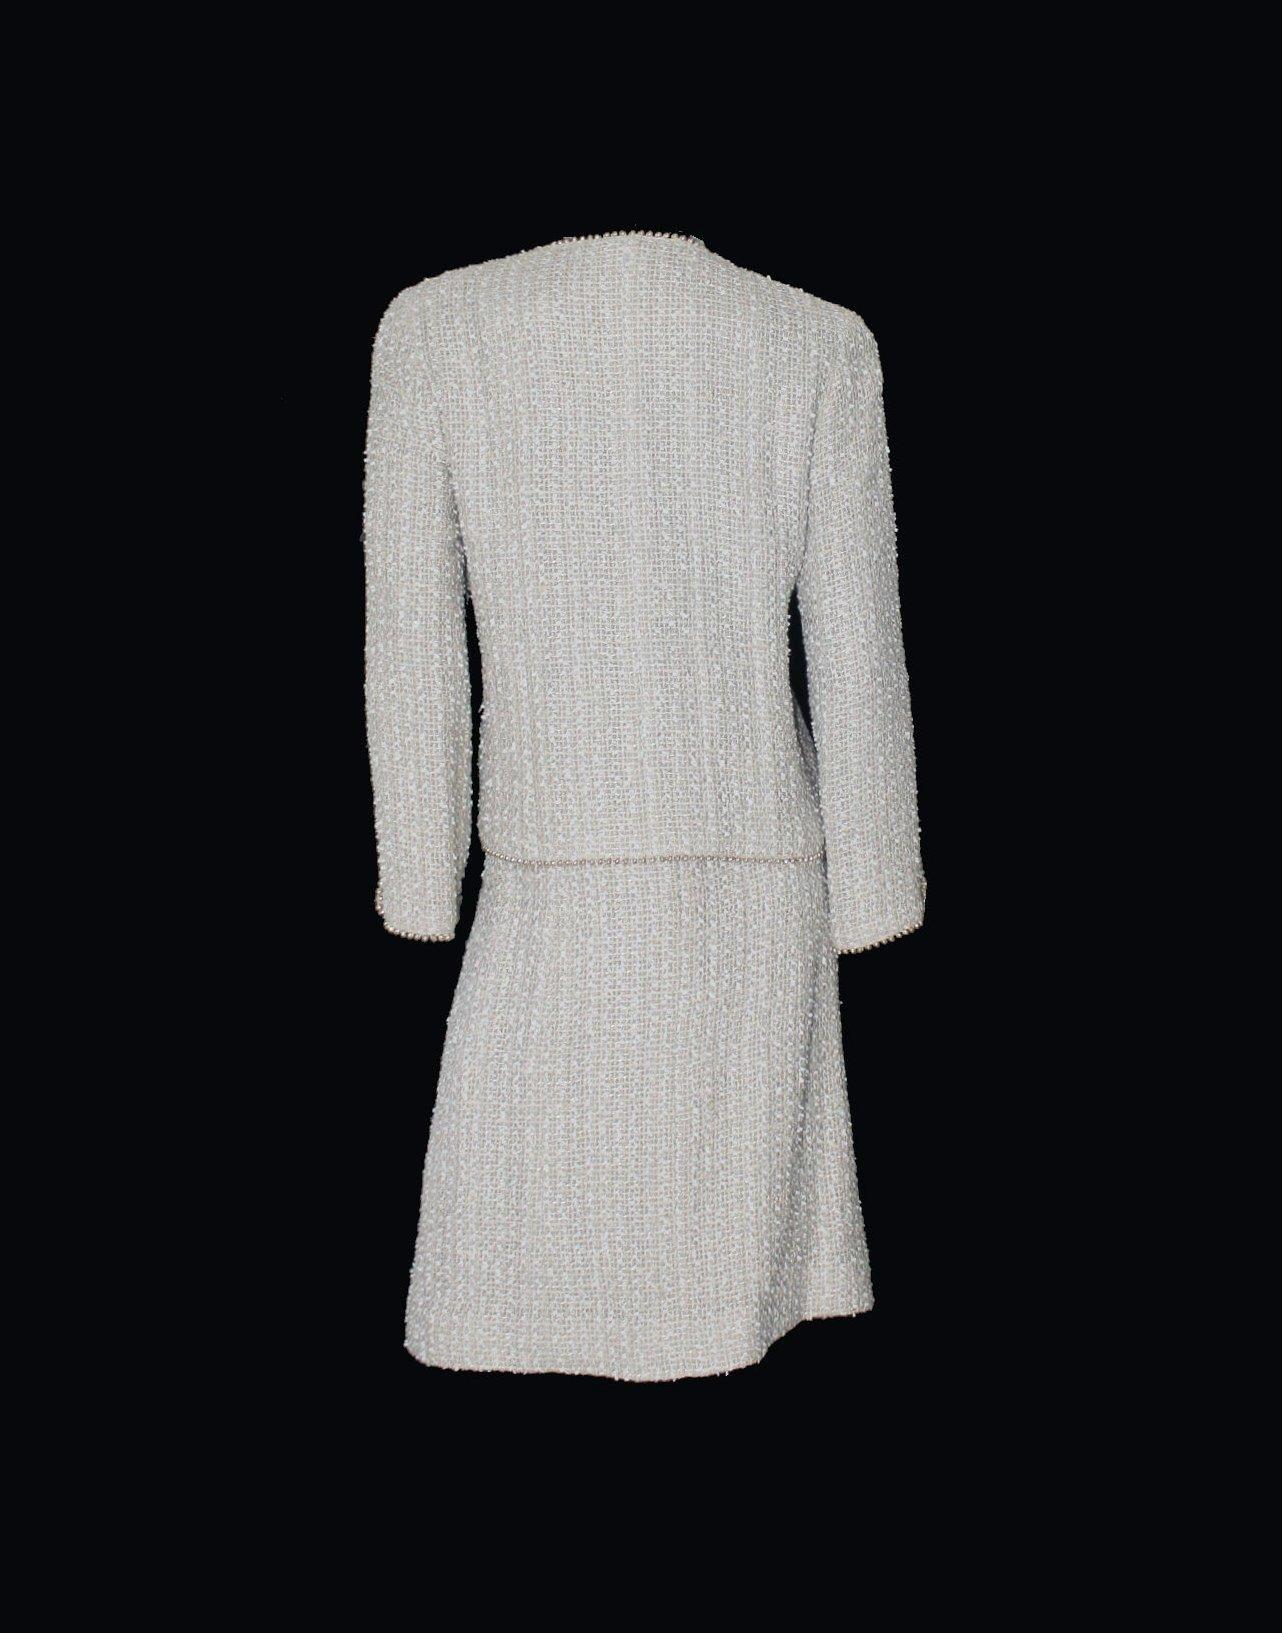 Women's CHANEL Rare Ivory Fantasy Tweed Skirt Suit with Pearl Trimming Details 38 For Sale